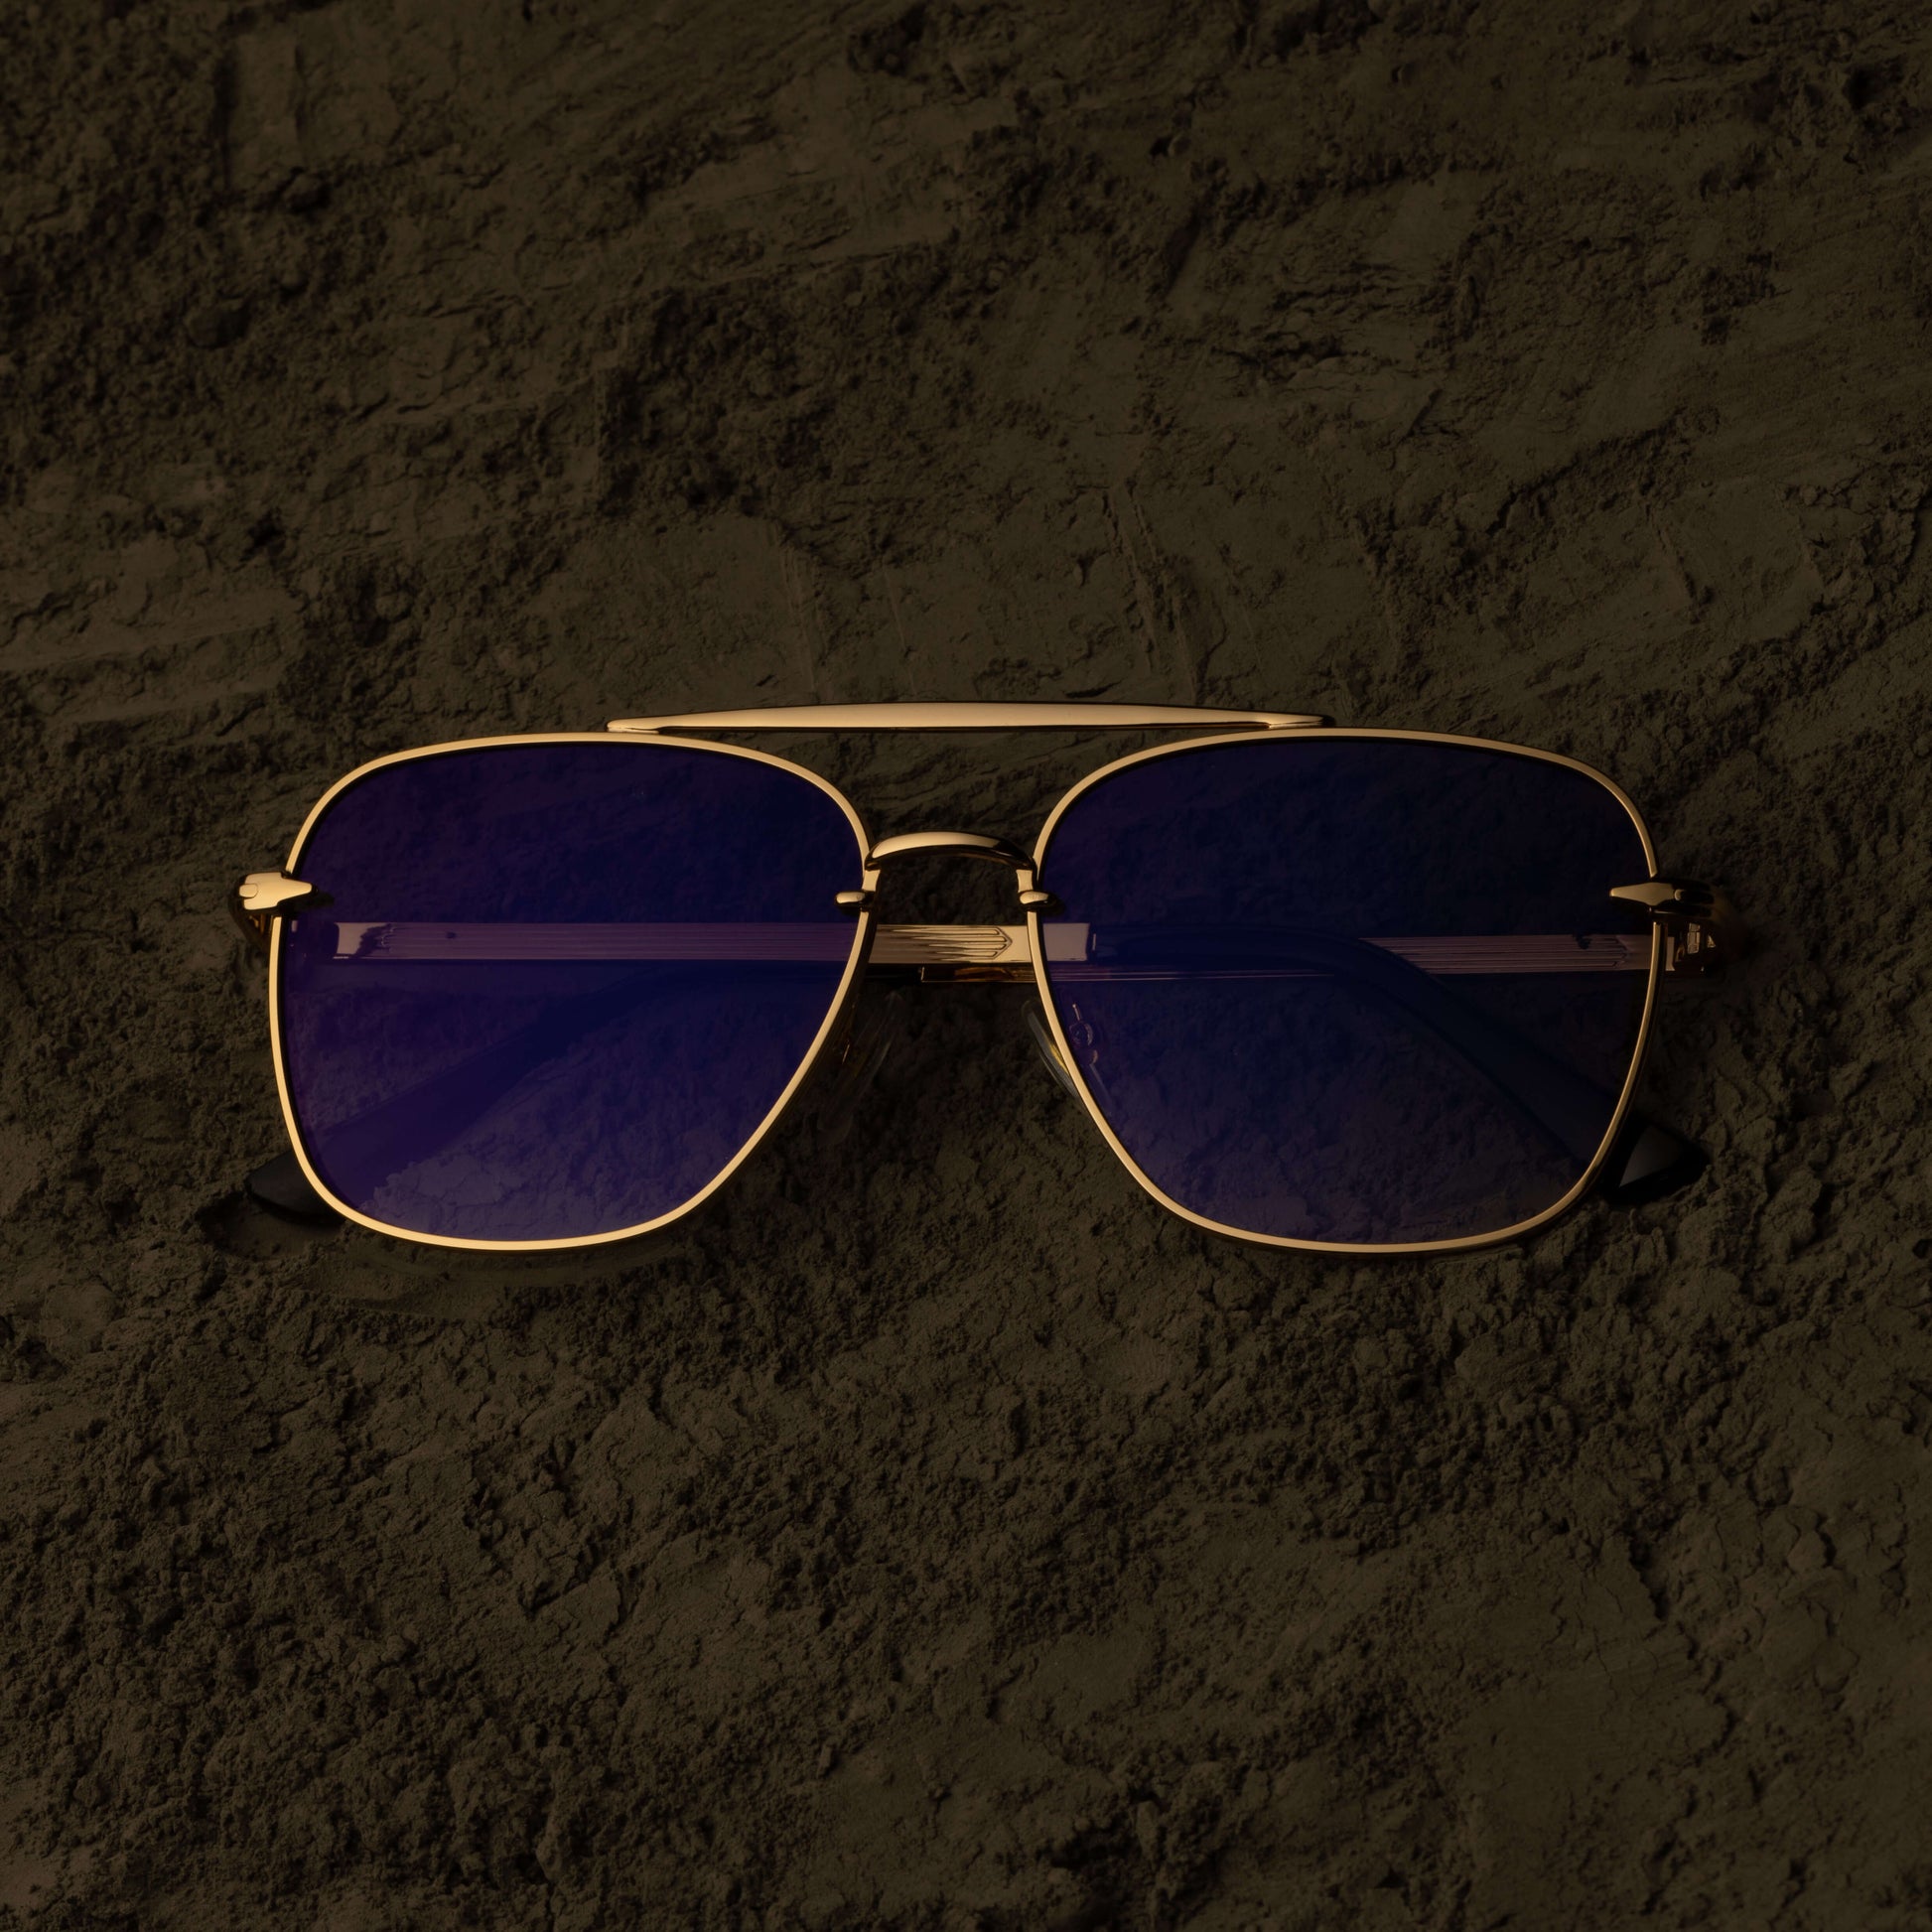 MRX - 18K Gold plated•18K gold-plated frame•18K gold-plated temples • Frame suitable for prescription lenses• 100% UV protection • Fitting: Adjustable nosepadsDhs. 995.00